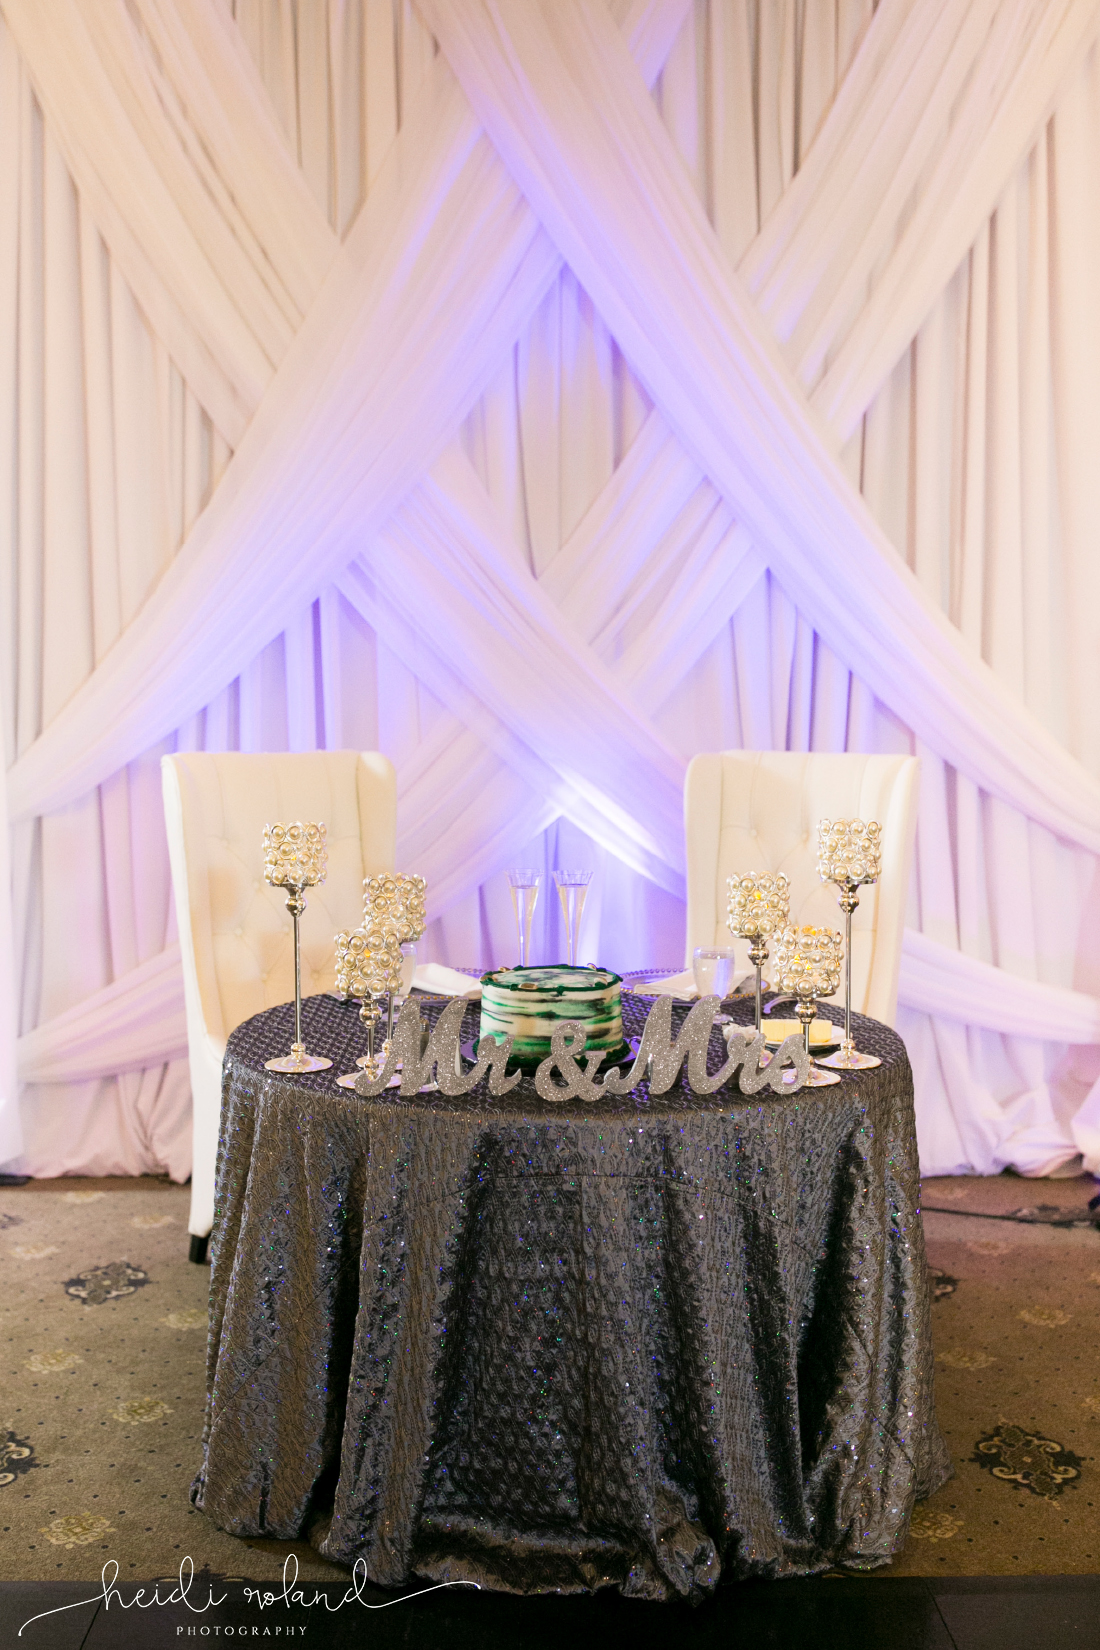 sweetheart table with purple uplighting and eagles cake